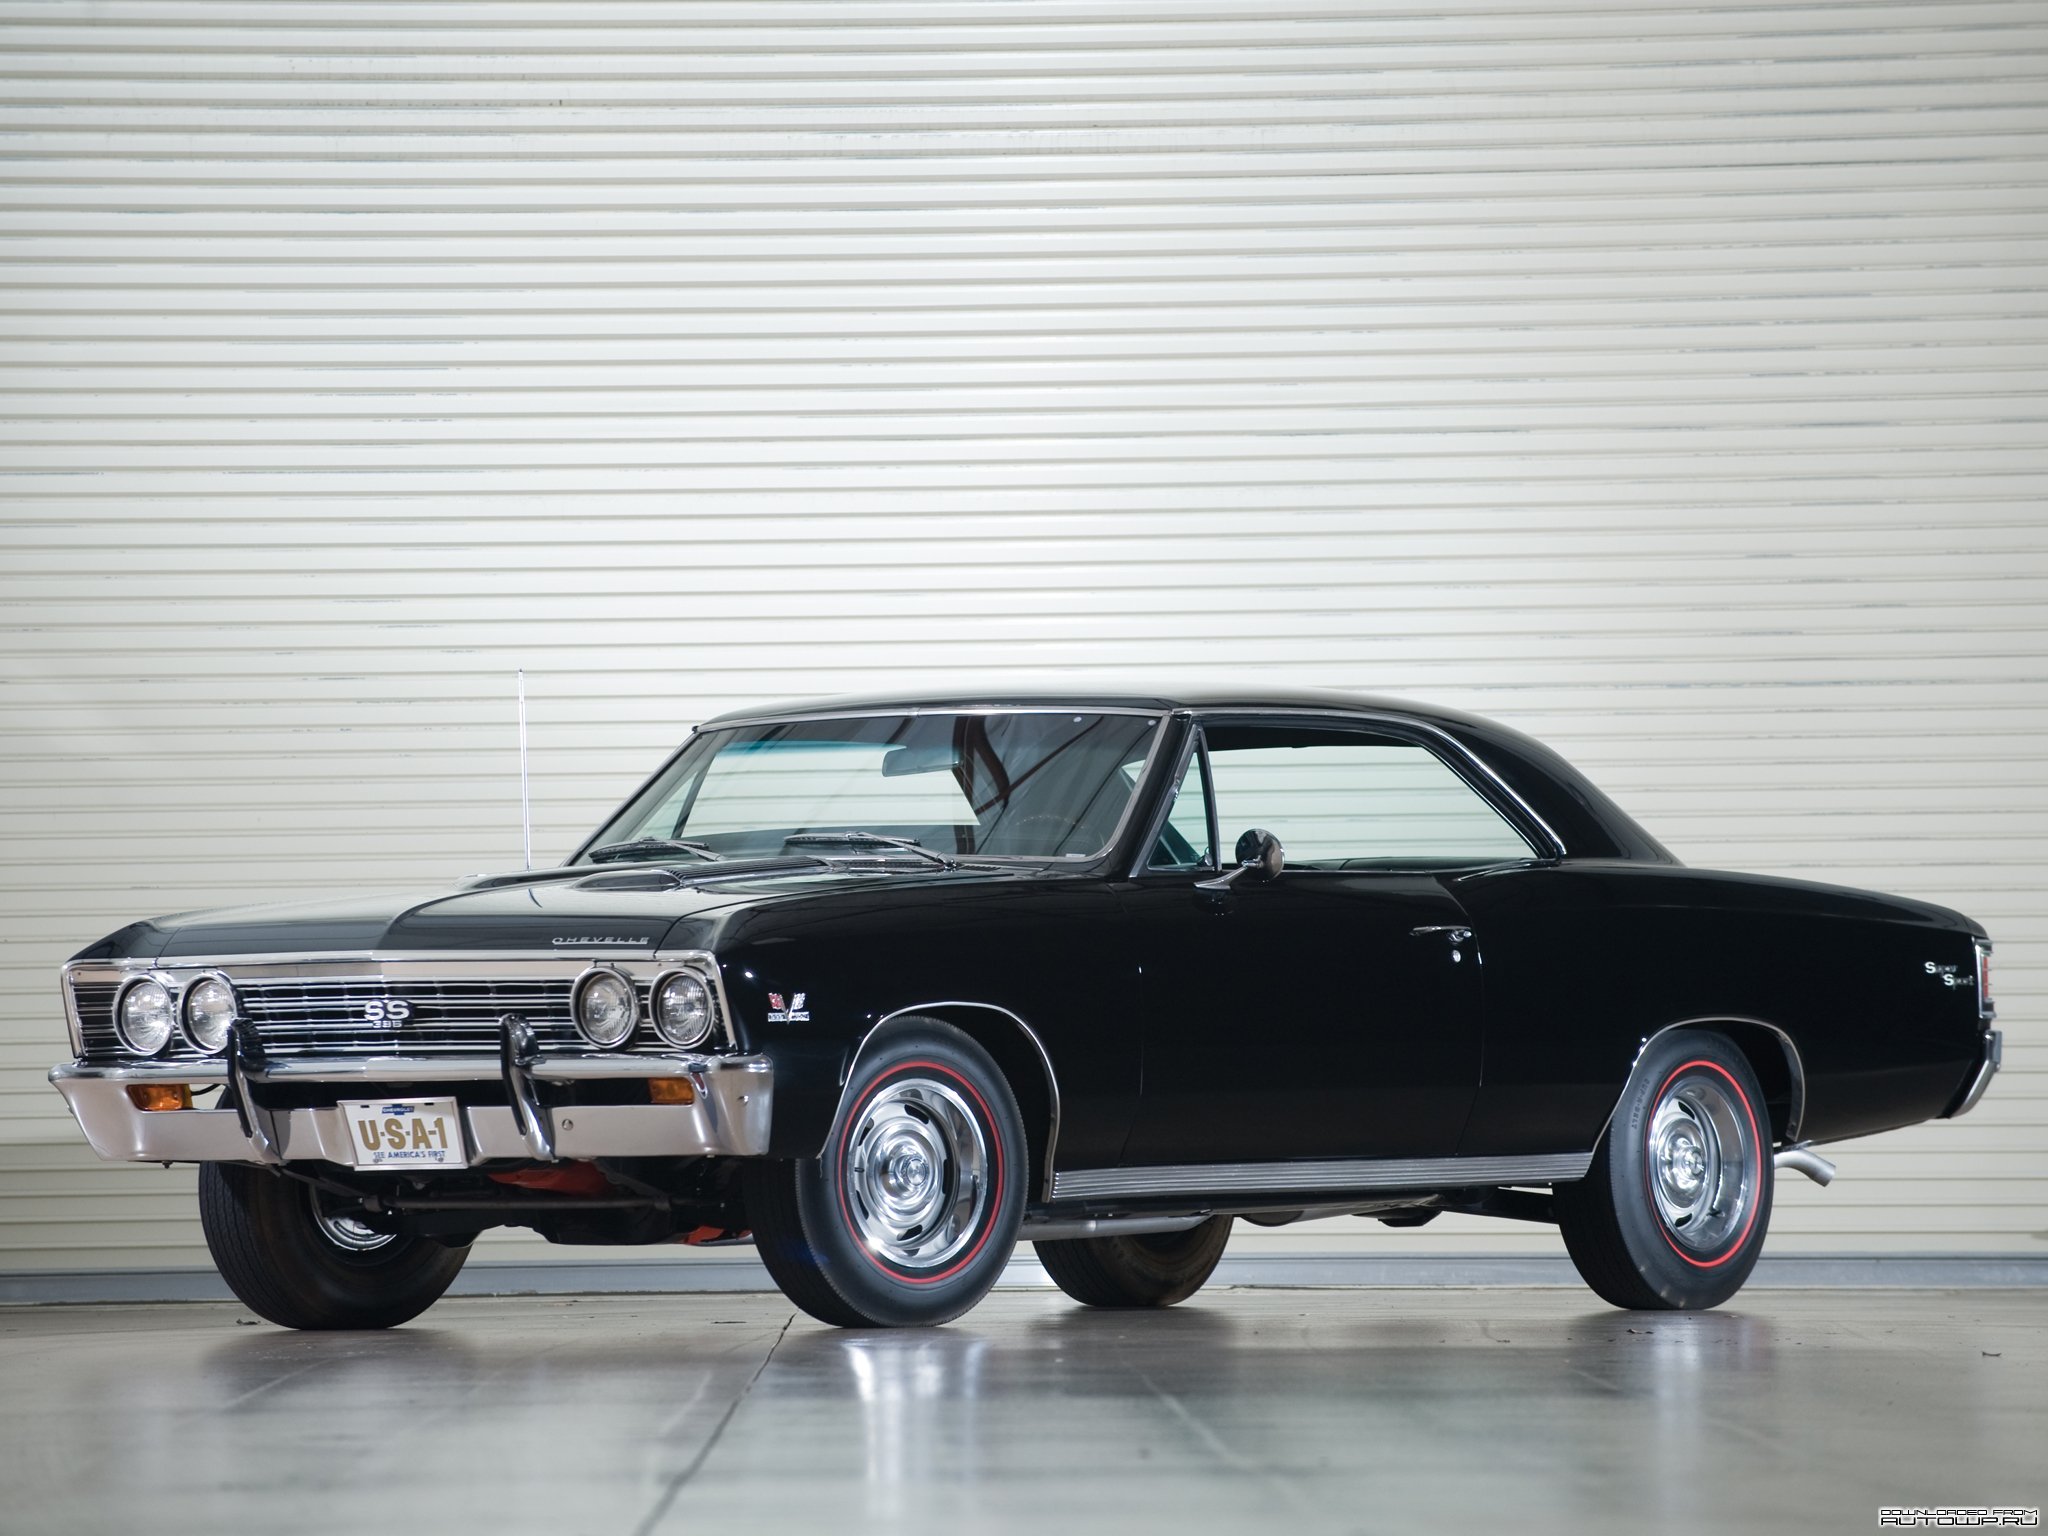 67 Chevelle Wallpapers 